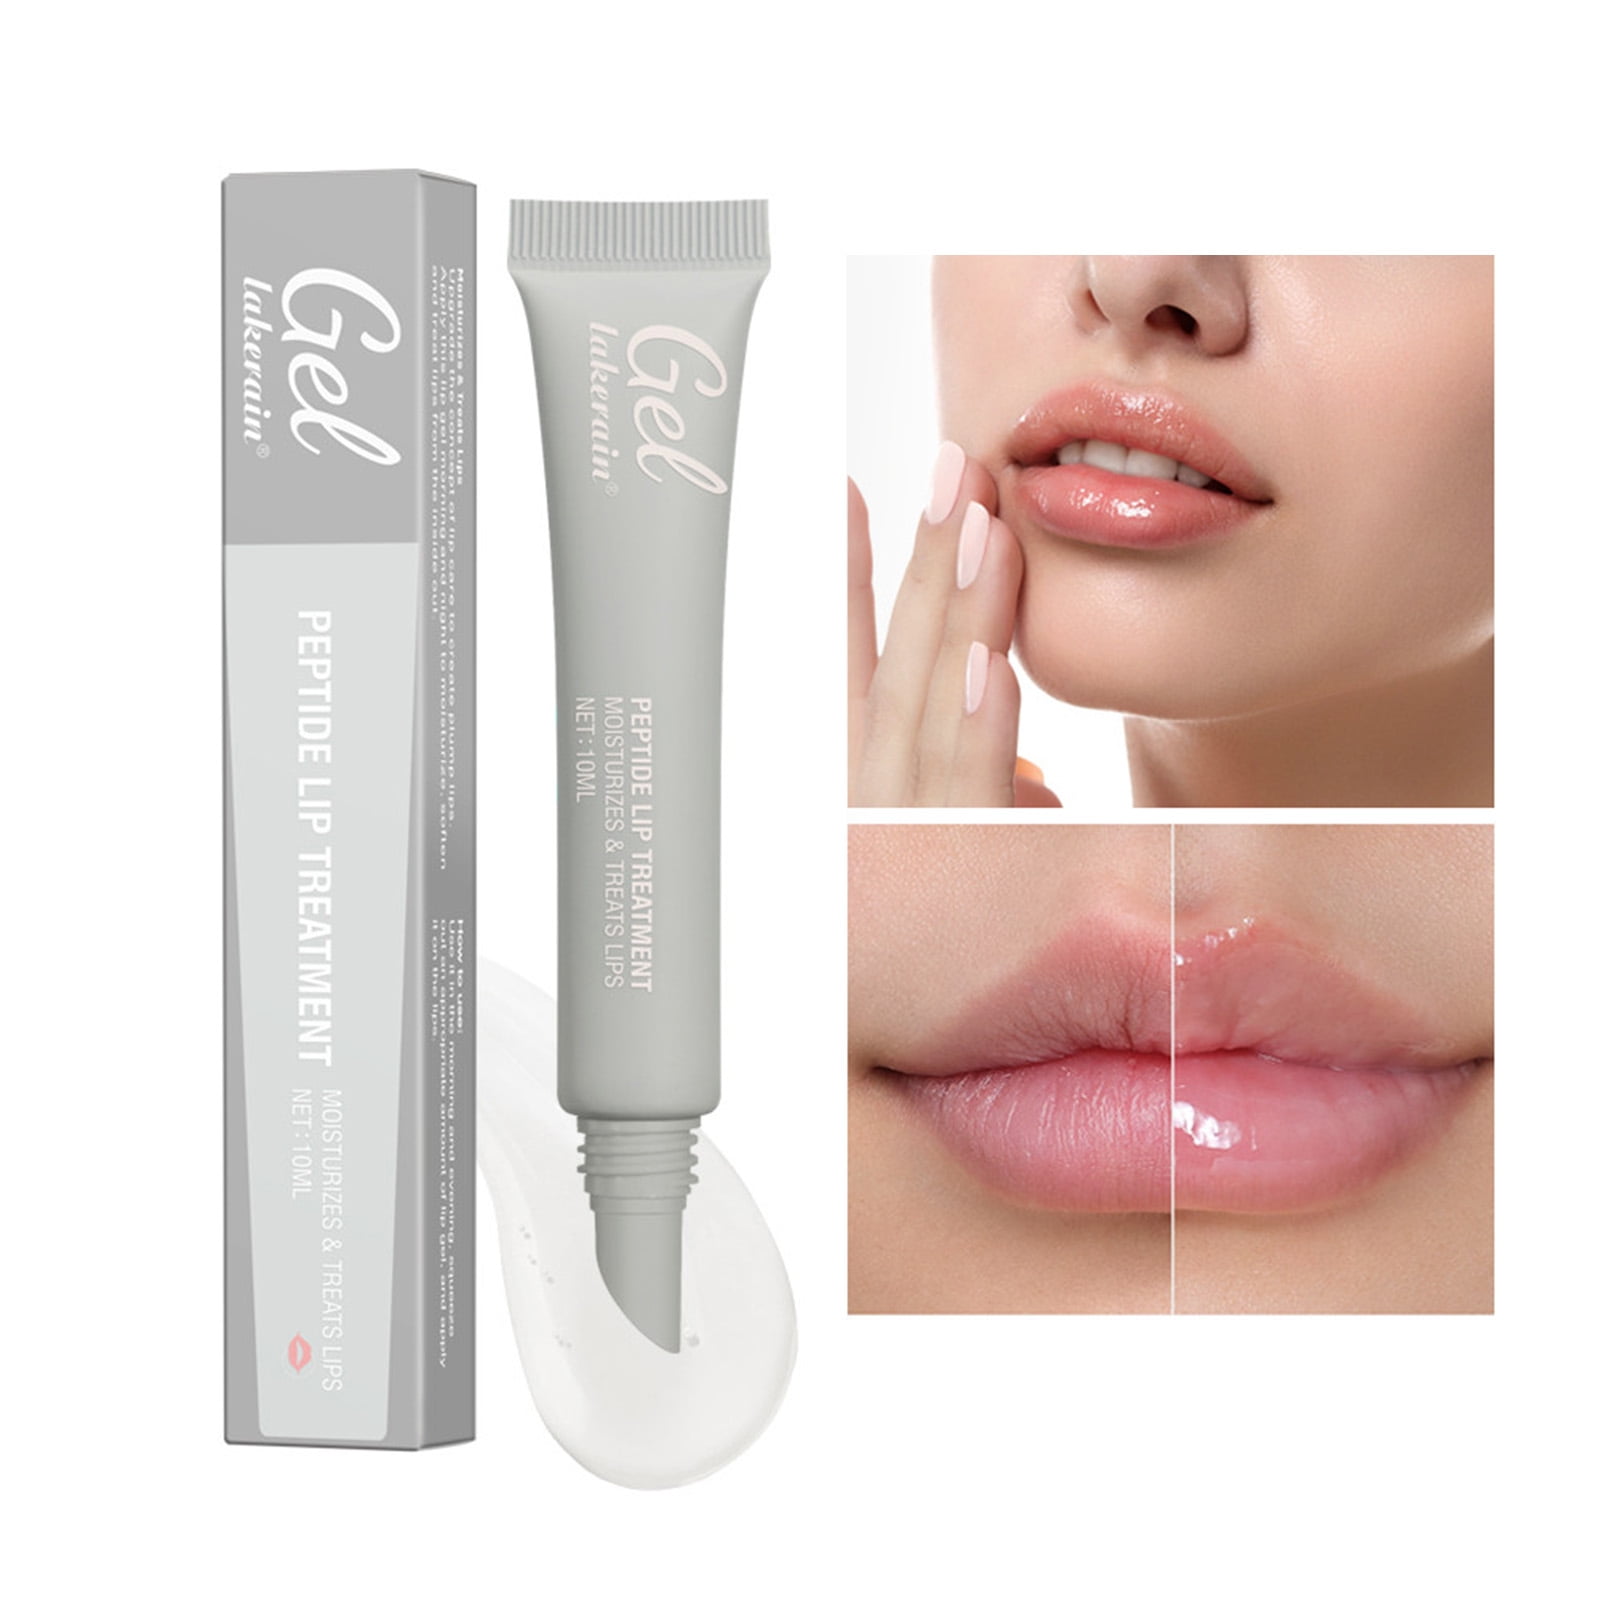 Rhode Peptide Lip Treatment, Balm, and Tint - Nourish and Enhance